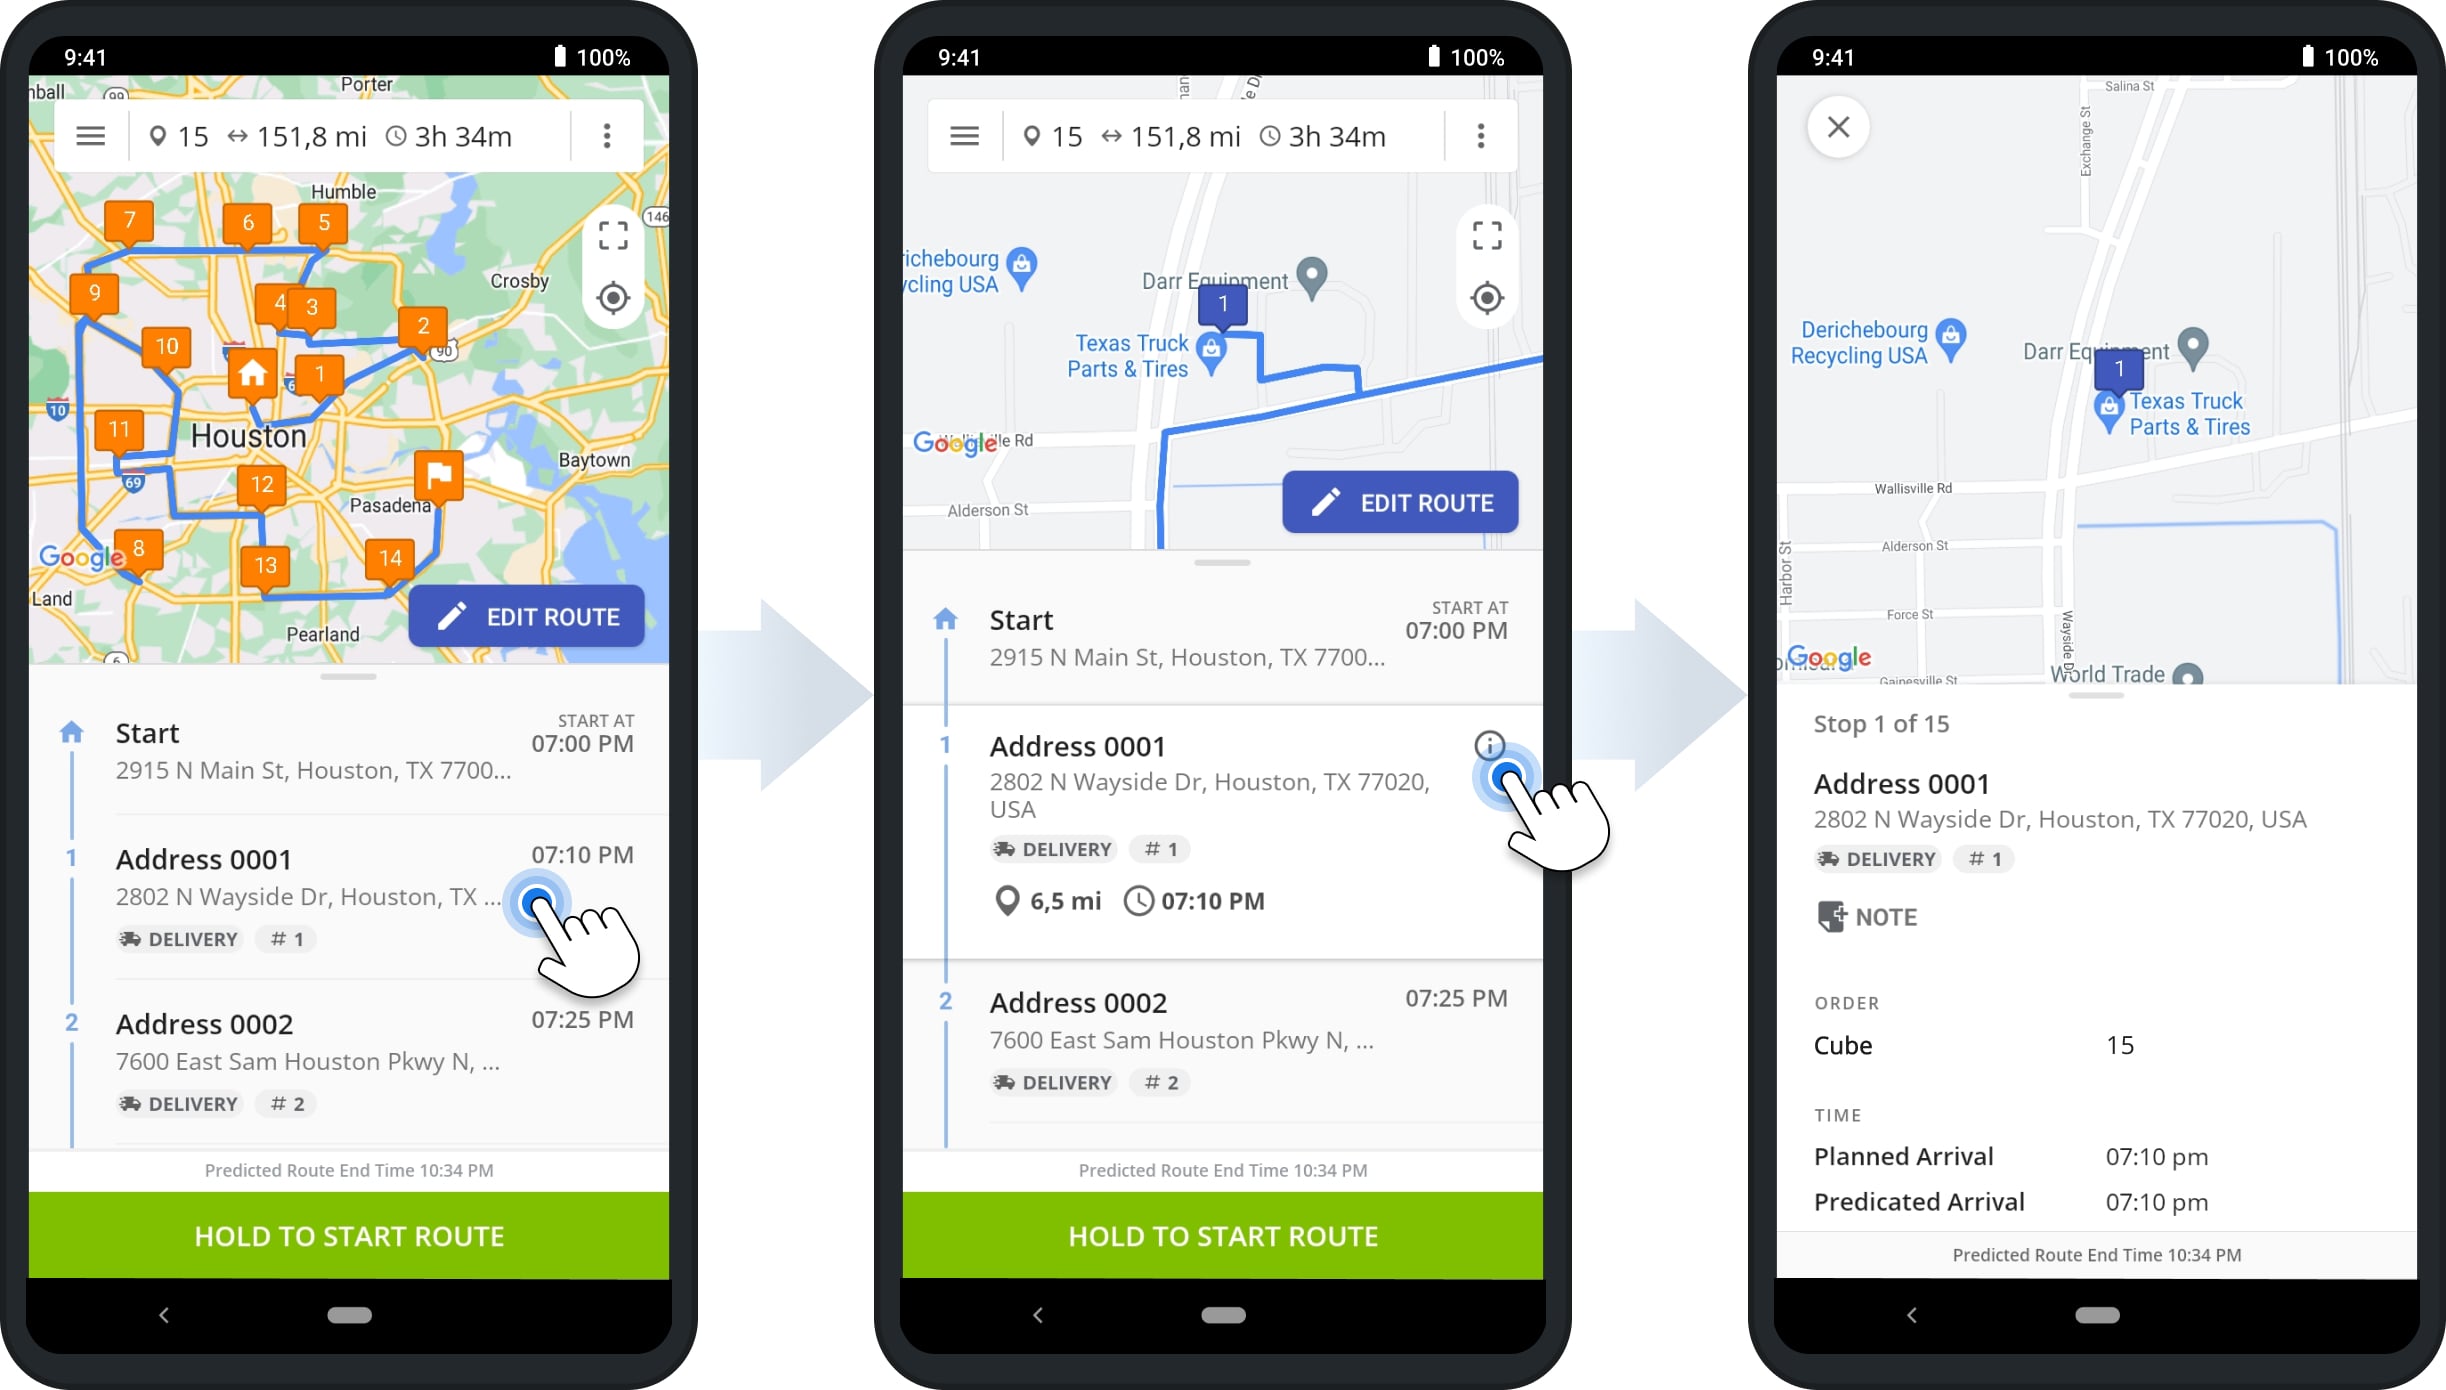 To view Order Cubic Volume on the mobile Route Planner App, open the route, tap the preferred destination, and then tap the Information Icon to open the Destination Info.